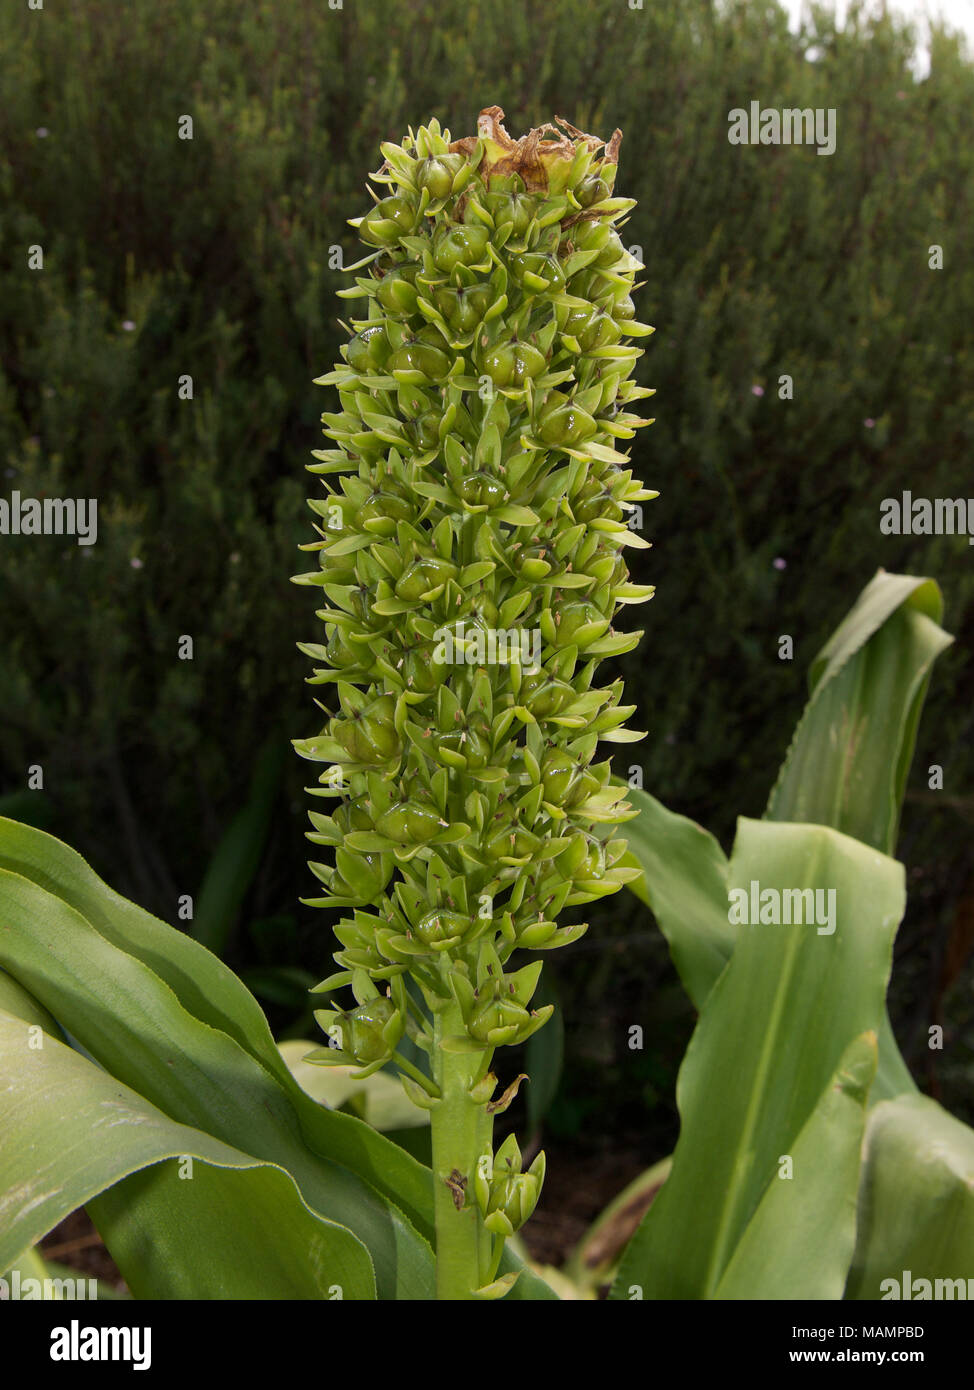 Eucomis pallidiflora Giant Pineapple Flower, Giant Pineapple Lily, Asparagaceae in seed, in South Africa Stock Photo